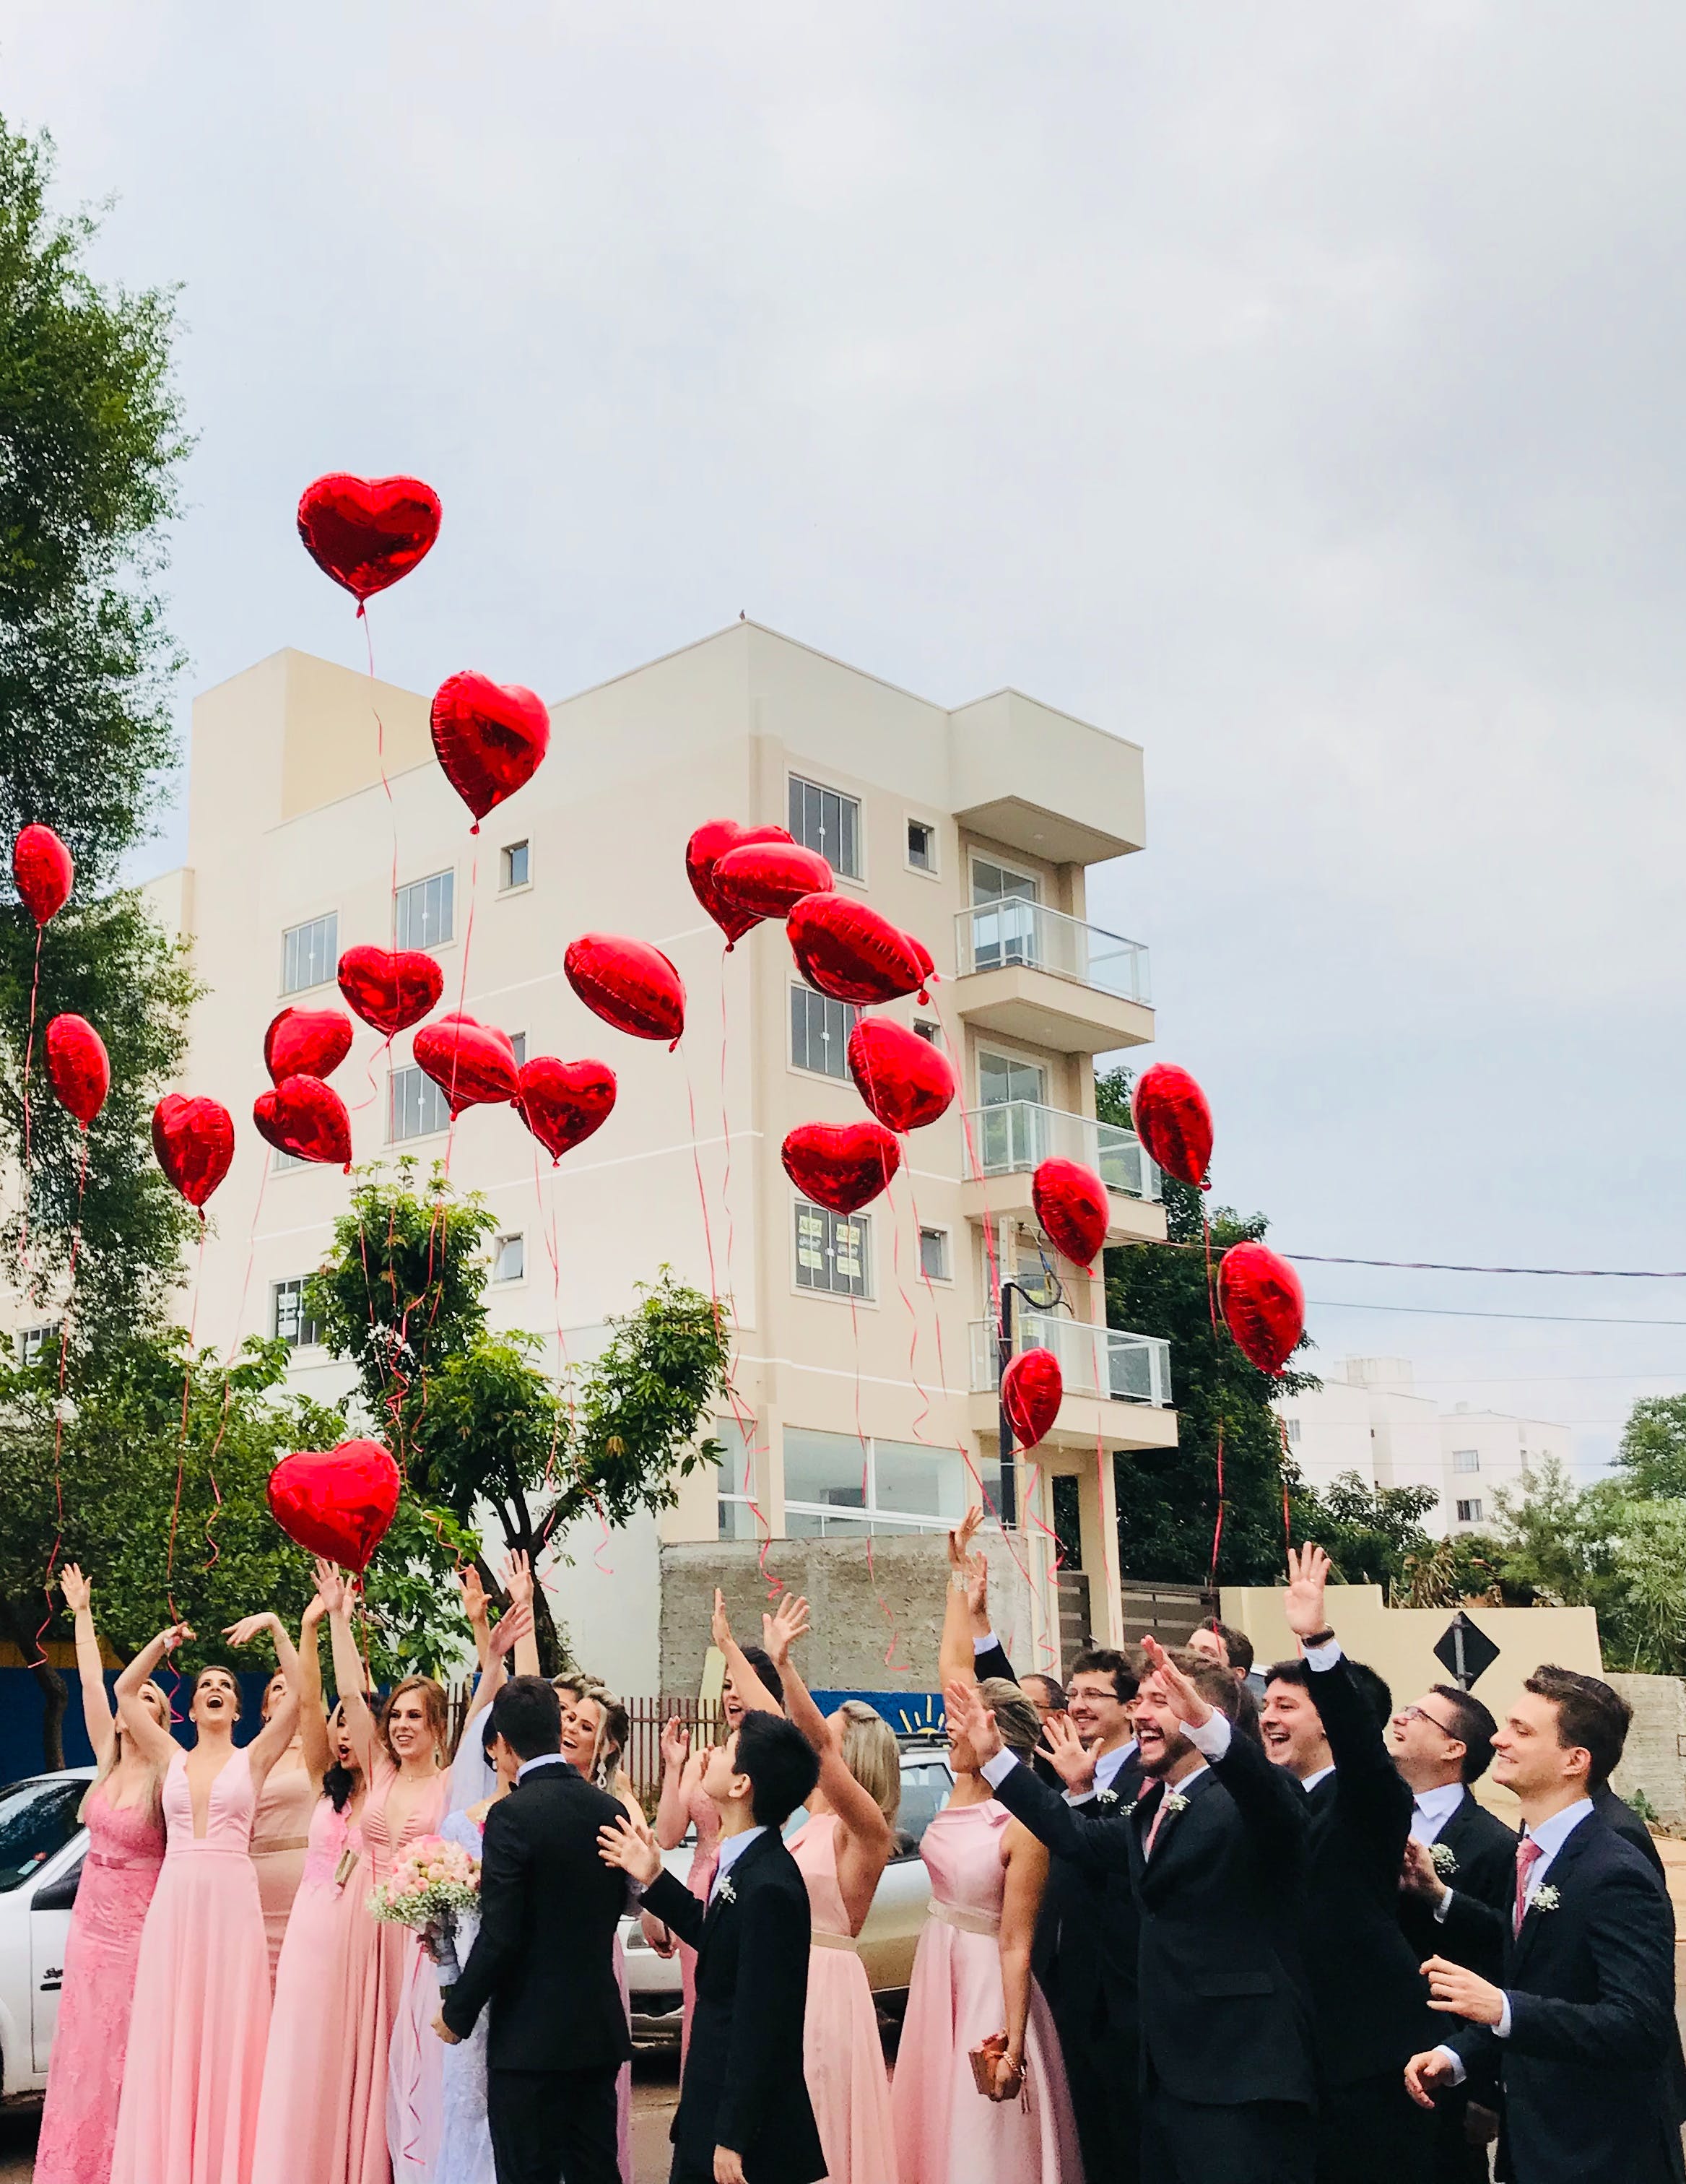 A wedding party releasing heart-shaped balloons in the street | Source: Pexels